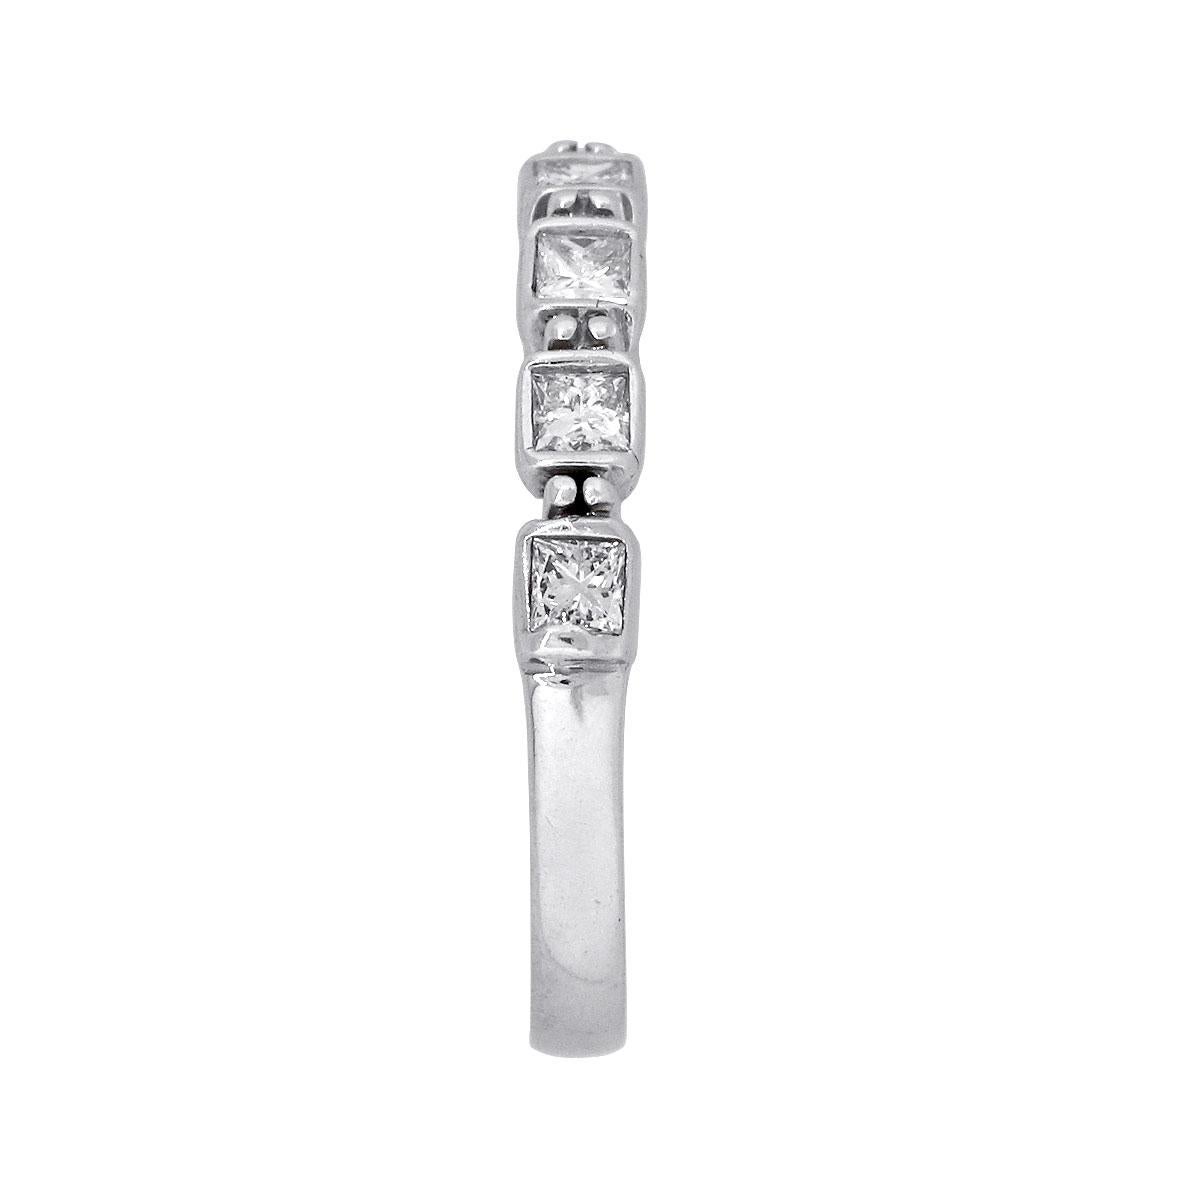 Material: 18k White Gold
Diamond Details: Approx. 0.50ctw of Princess Cut diamonds. Diamonds are G/H in color and VS in clarity
Ring Size: 6.50
Ring Measurements: 0.80